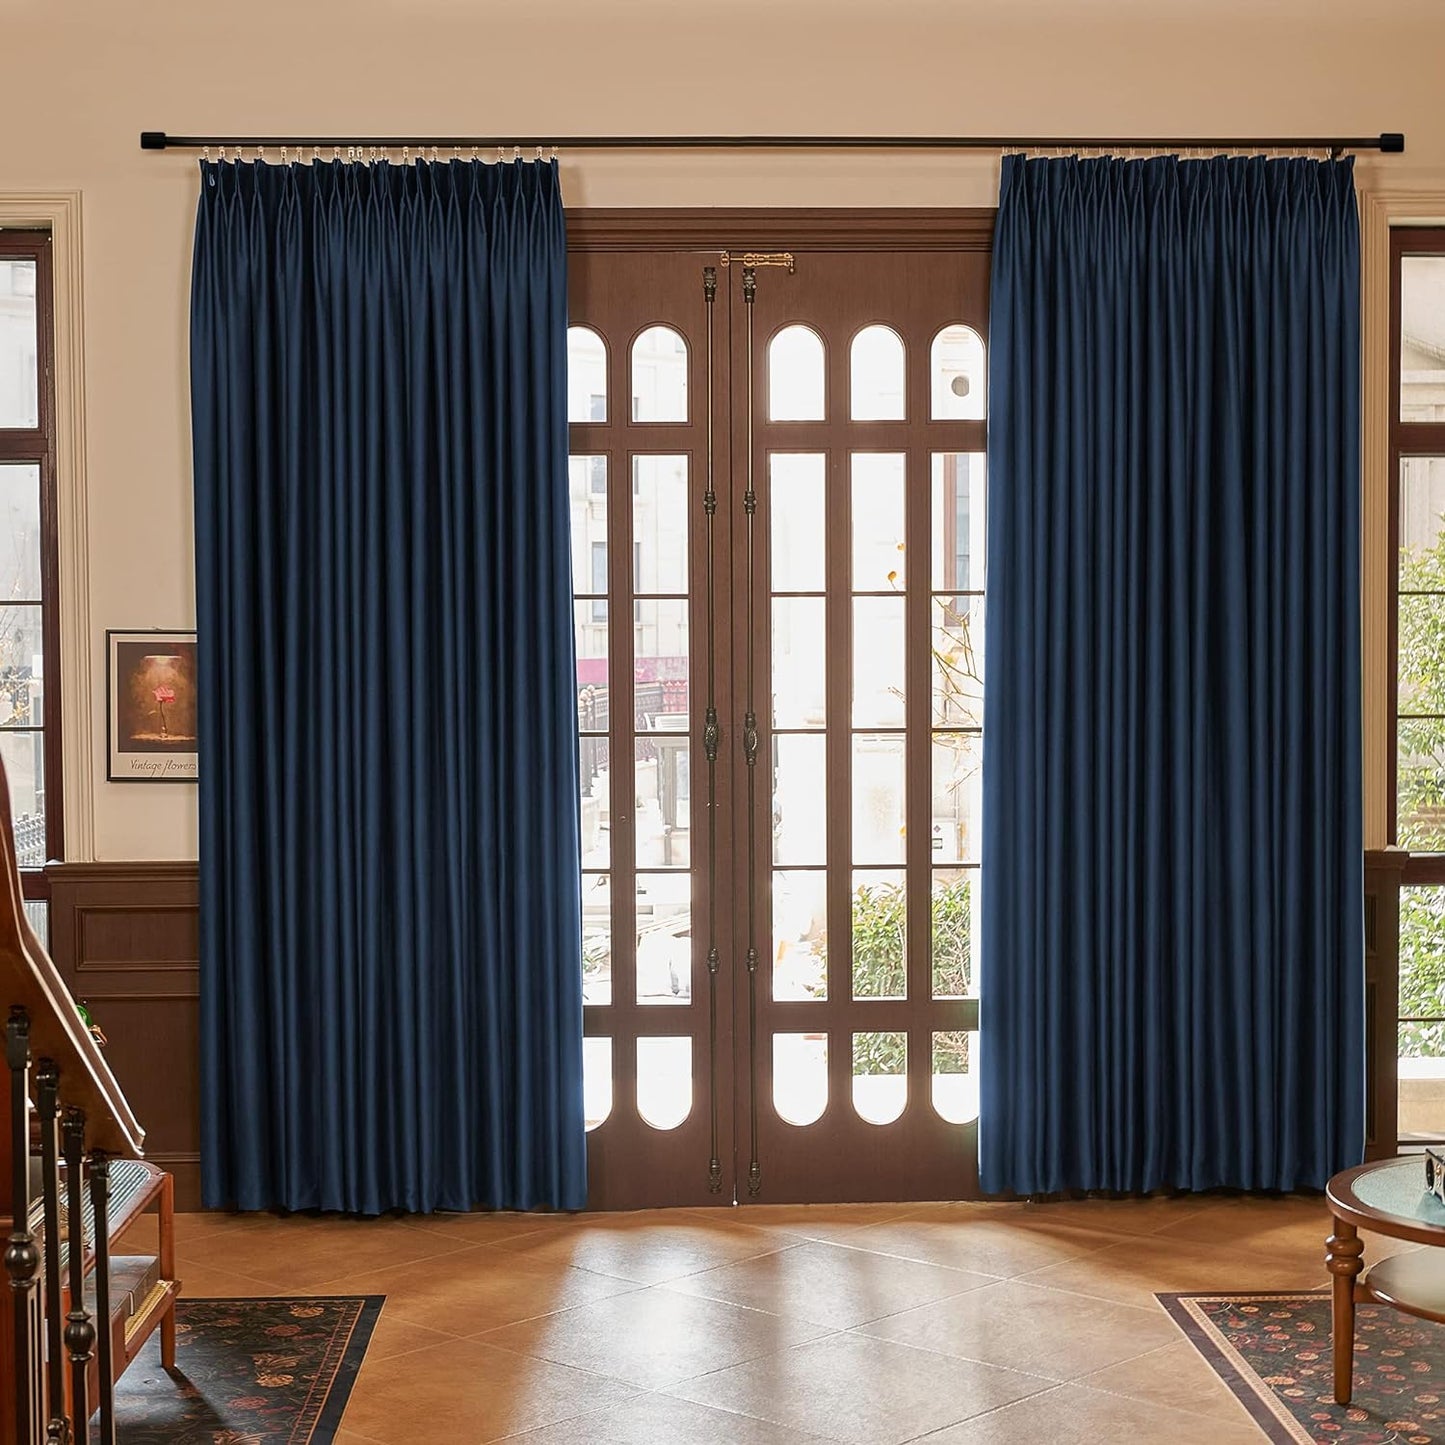 HUTO Beige Pinch Pleated Curtains Thermal Insulated Room Darkening Window Treatment Panel for Living Room, Bedroom, Kitchen, Small Window, 52 by 63 Inches Long, 1 Panel  HUTO Navy 72"W X 96"L 